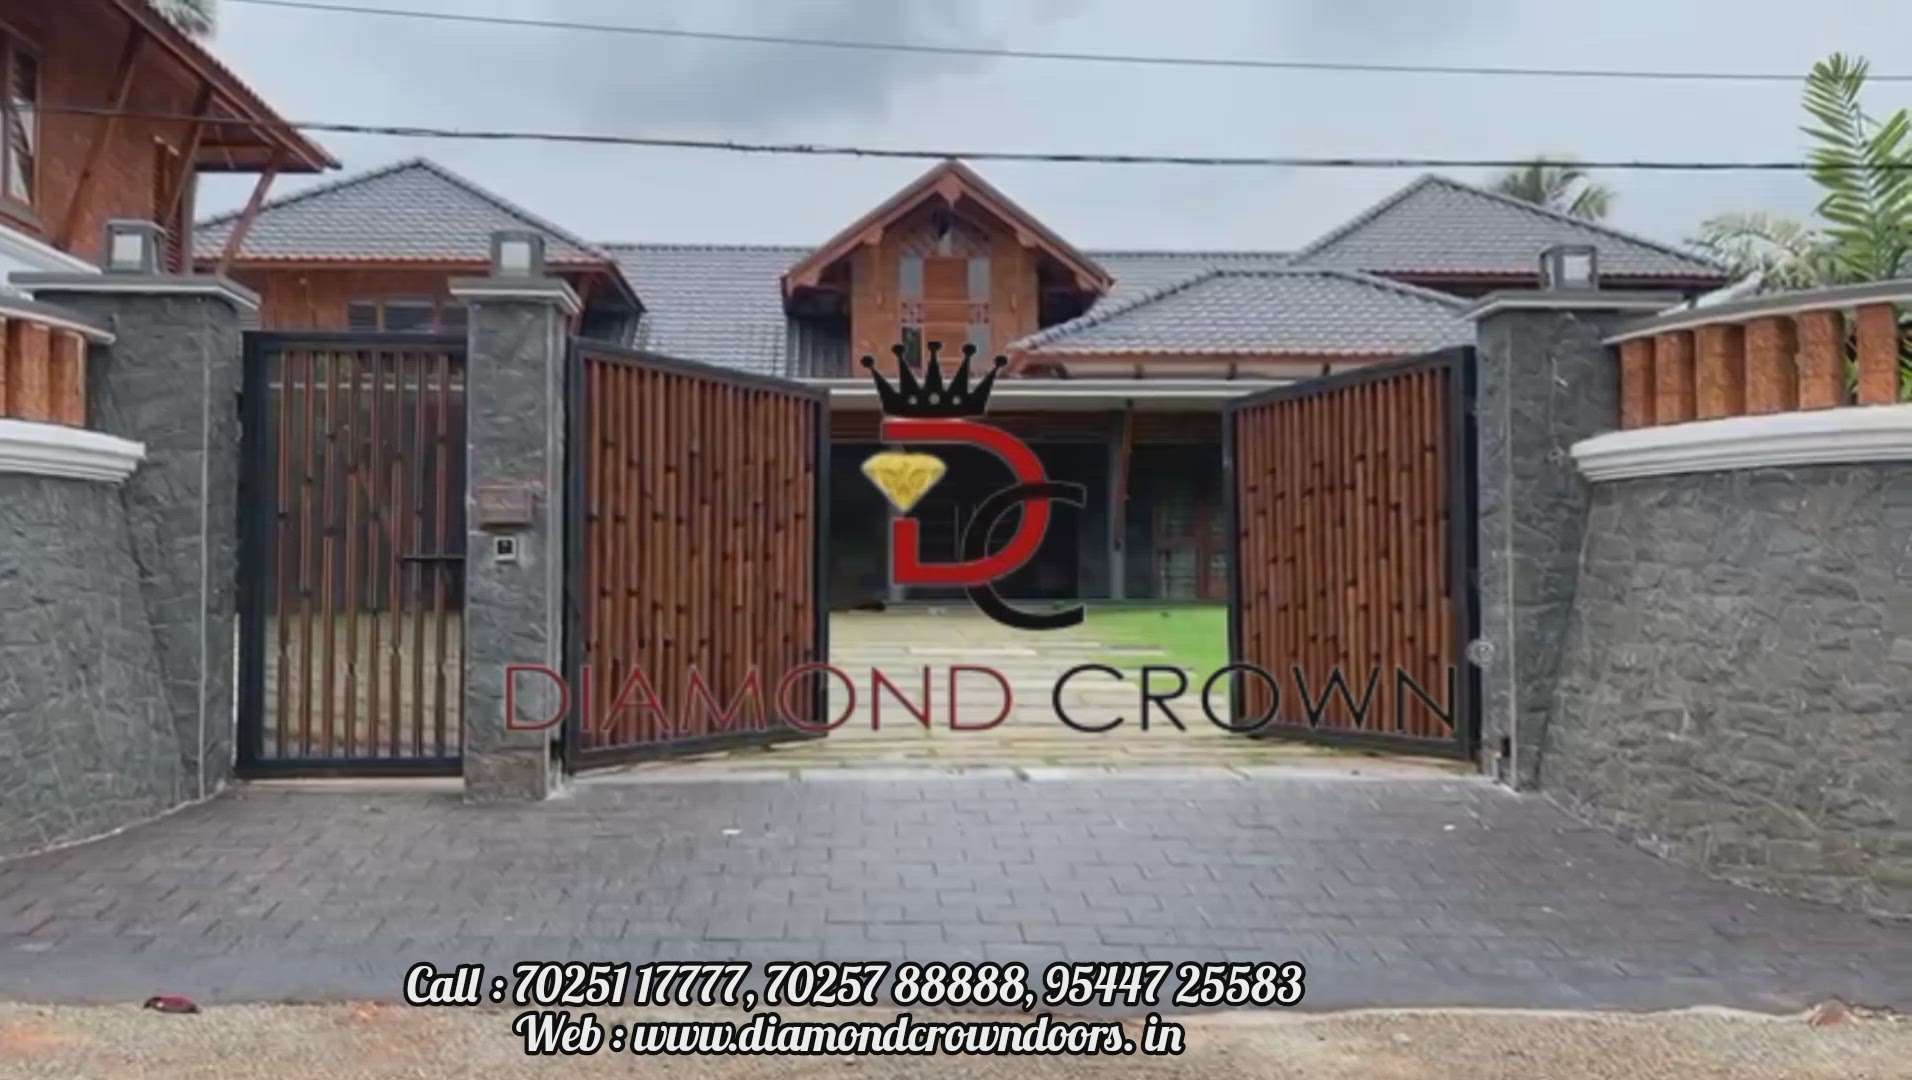 We provide our customers with the best, most innovative canopy designs and, overall, the superior quality material used at an affordable price. We do our best to meet our customer's every expectation. 
Get in touch with Diamond Crown for the most modern gate automation technologies. 
For more details contact: 09142777762 , 7025117777, 7025788888, 9544725583
#diamondcrownautomation #automaticgate #swinggate #remotegate  #homeautomation #crownmarketing #slidinggatemotors #slidinggate #canopy #moderndesign #beautiful #smarthome #home #InteriorDesigner